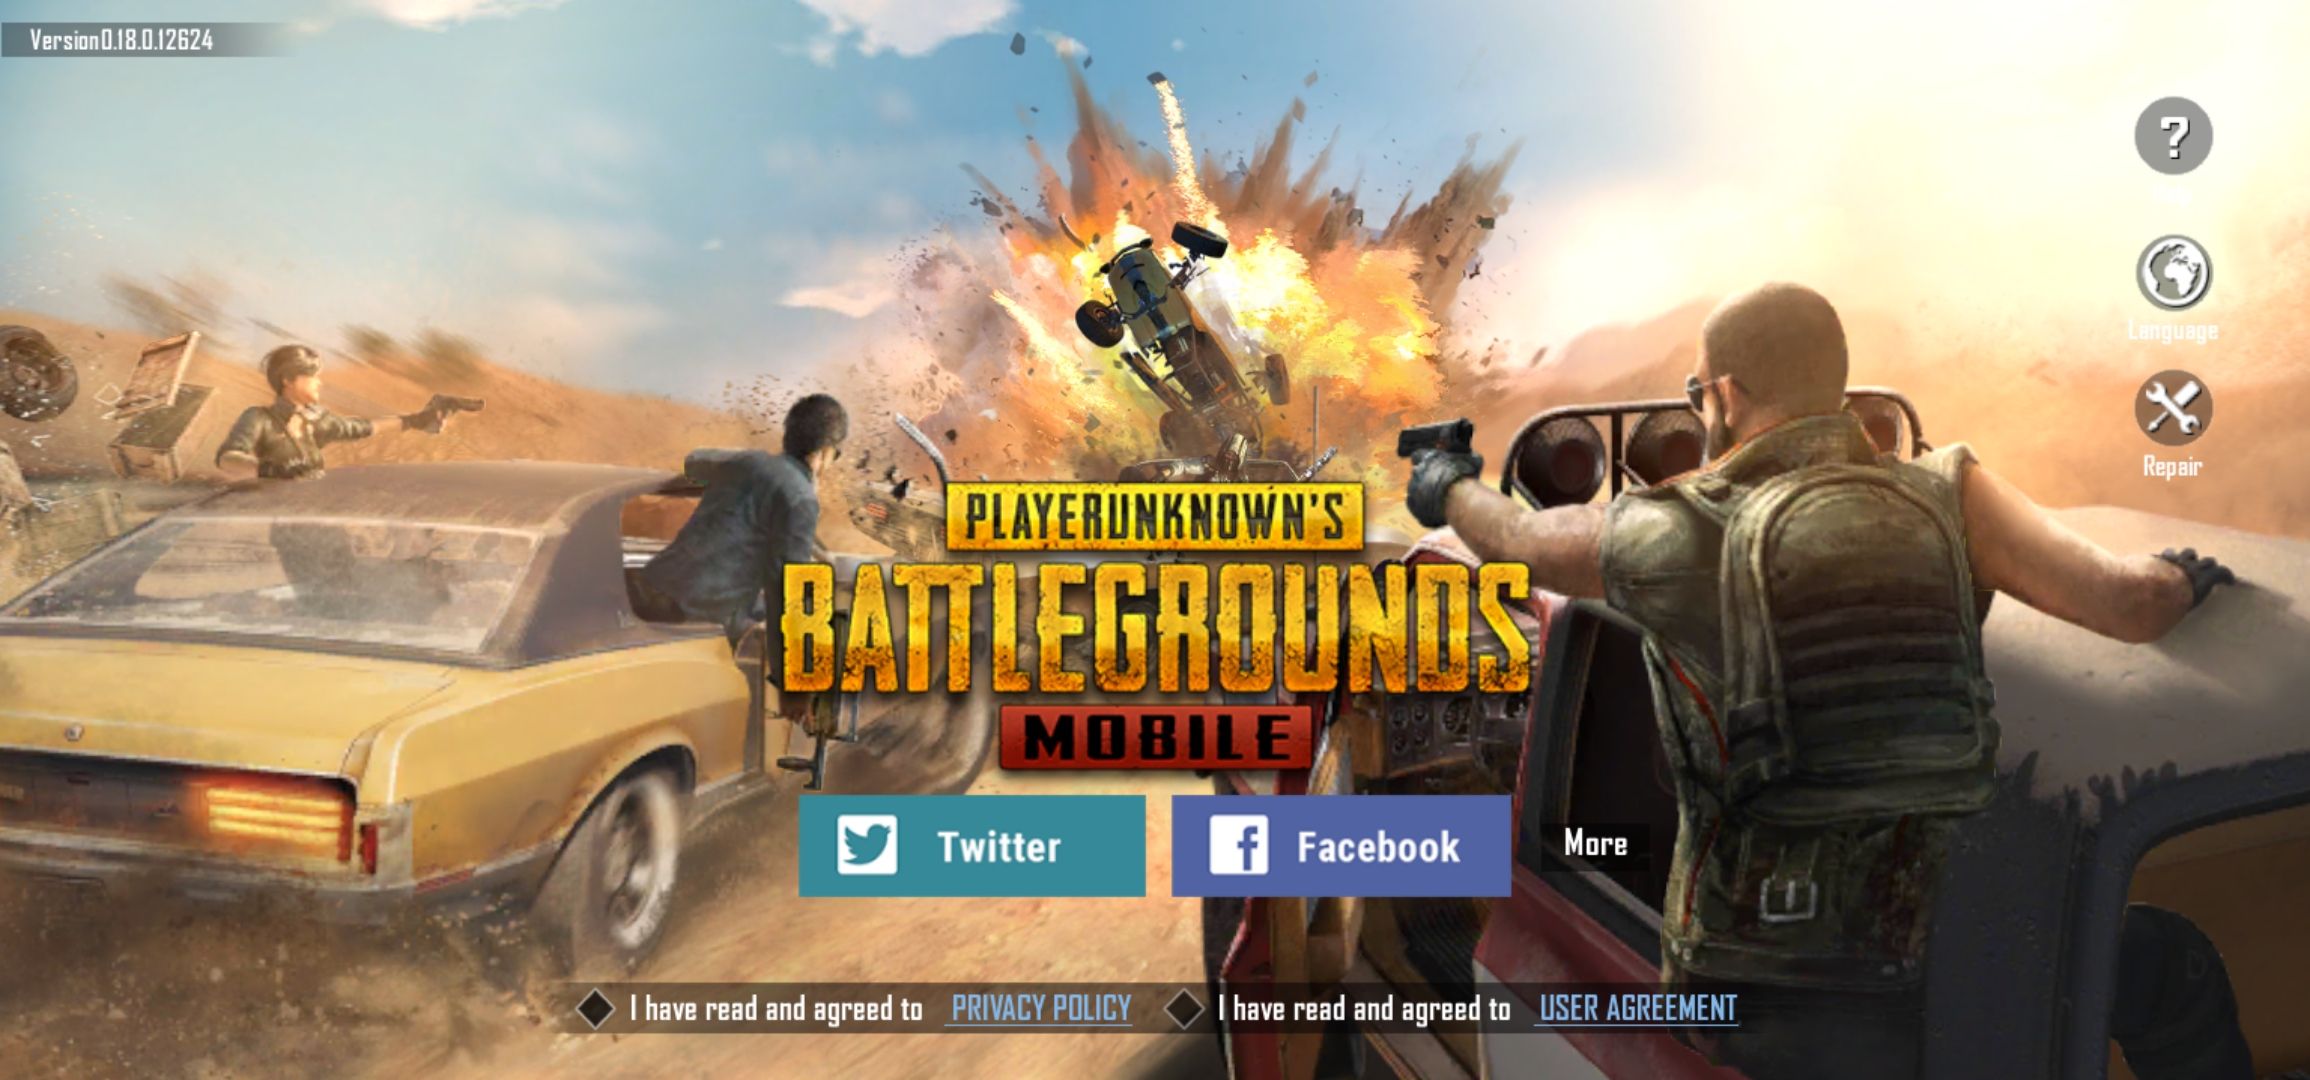 How to Install PUBG Mobile on Huawei Devices | No Google Services Needed 1